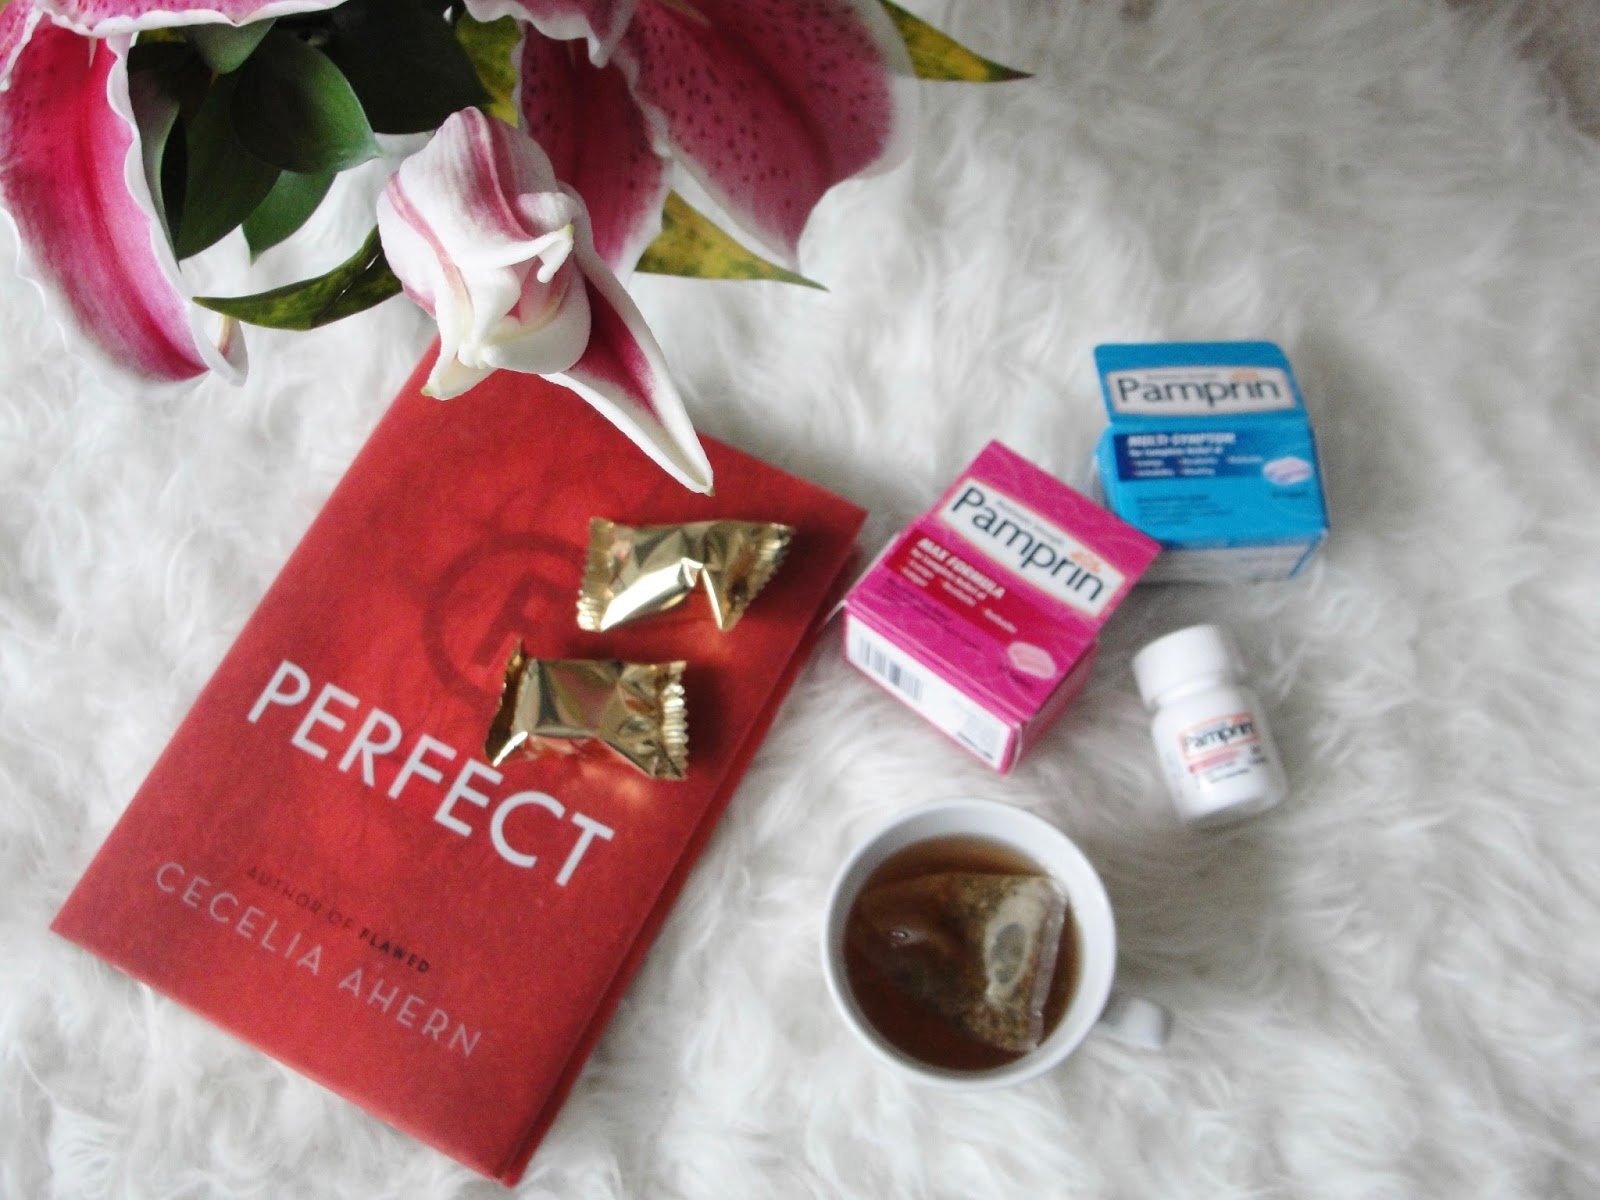 How to feel better during your period with Pamprin!